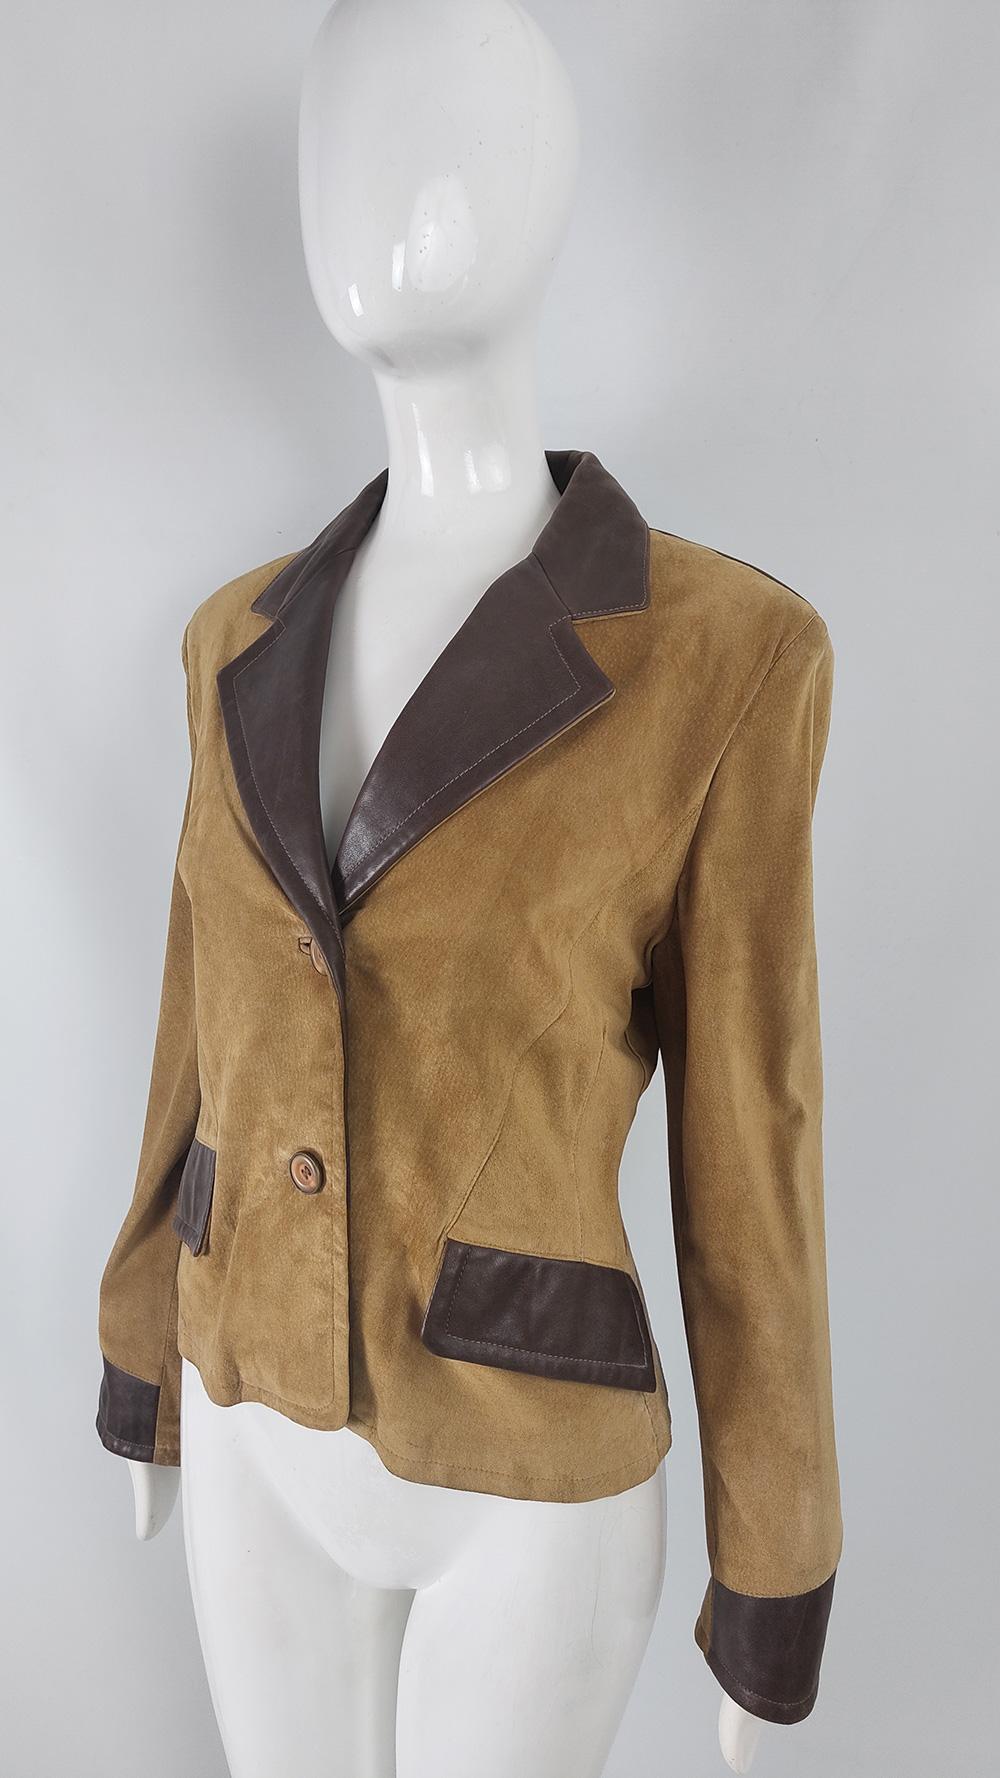 Byblos Vintage 80s Womens Fringed Brown Leather & Suede Jacket, 1980s In Excellent Condition For Sale In Doncaster, South Yorkshire